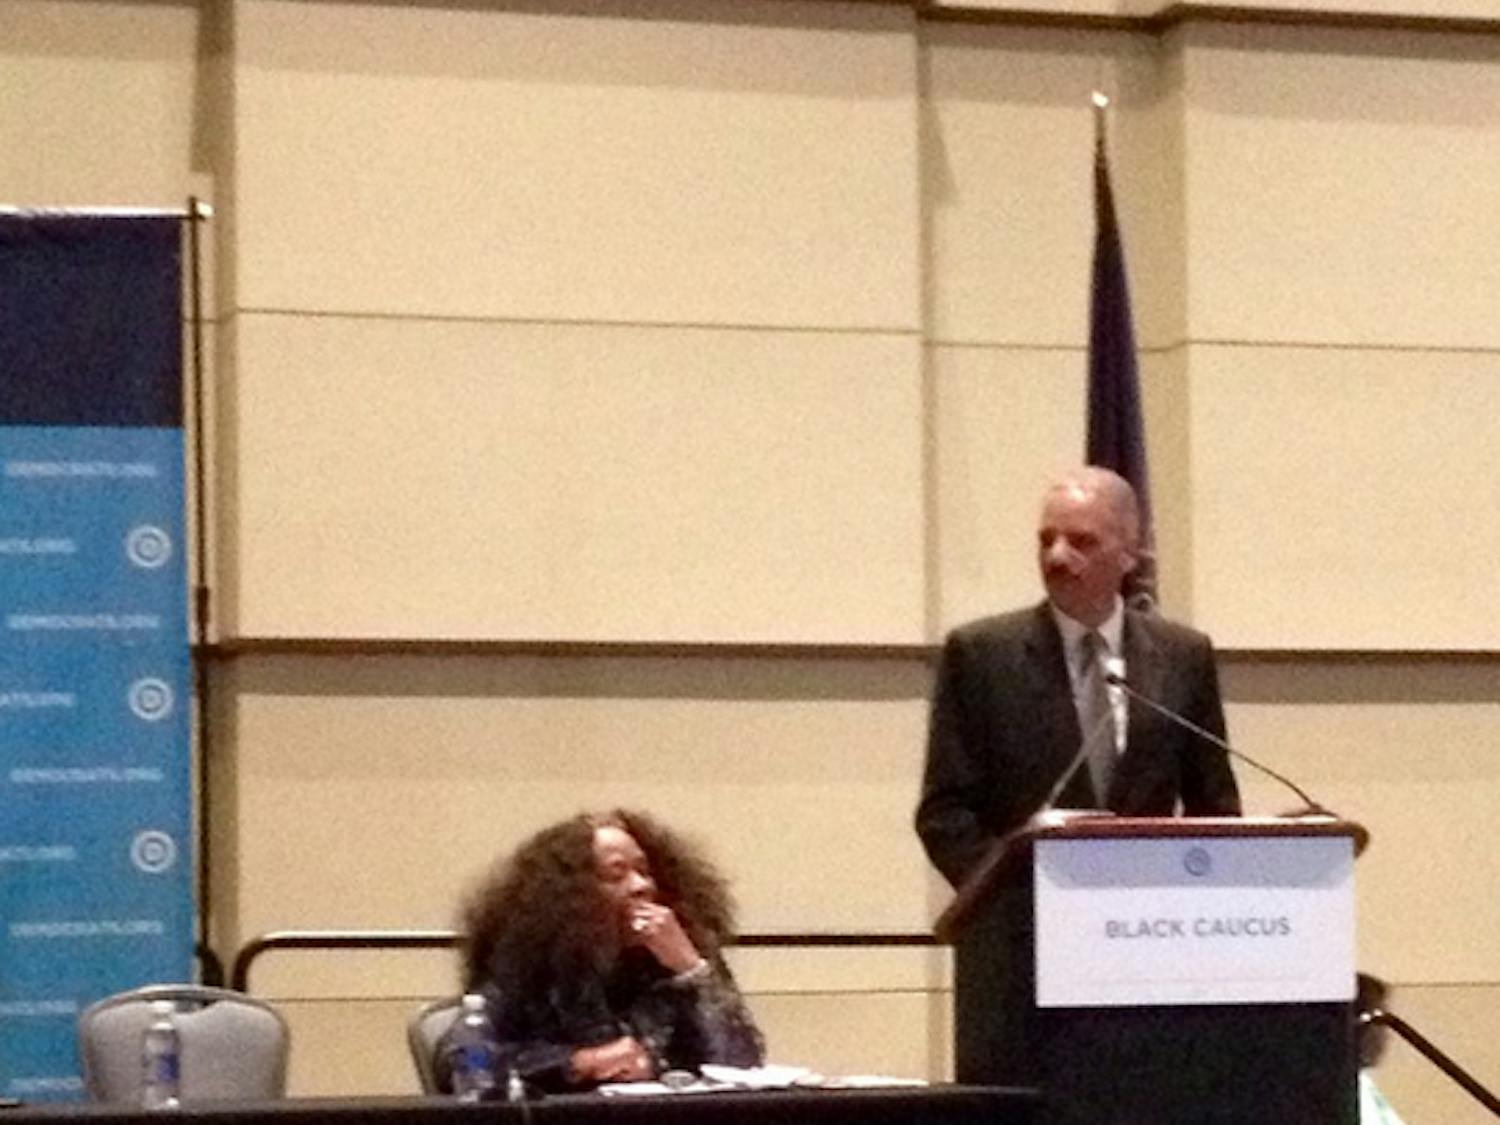 Former Attorney General Eric Holder addresses the black caucus at the Democratic National Convention in Philadelphia on July 27, 2016.